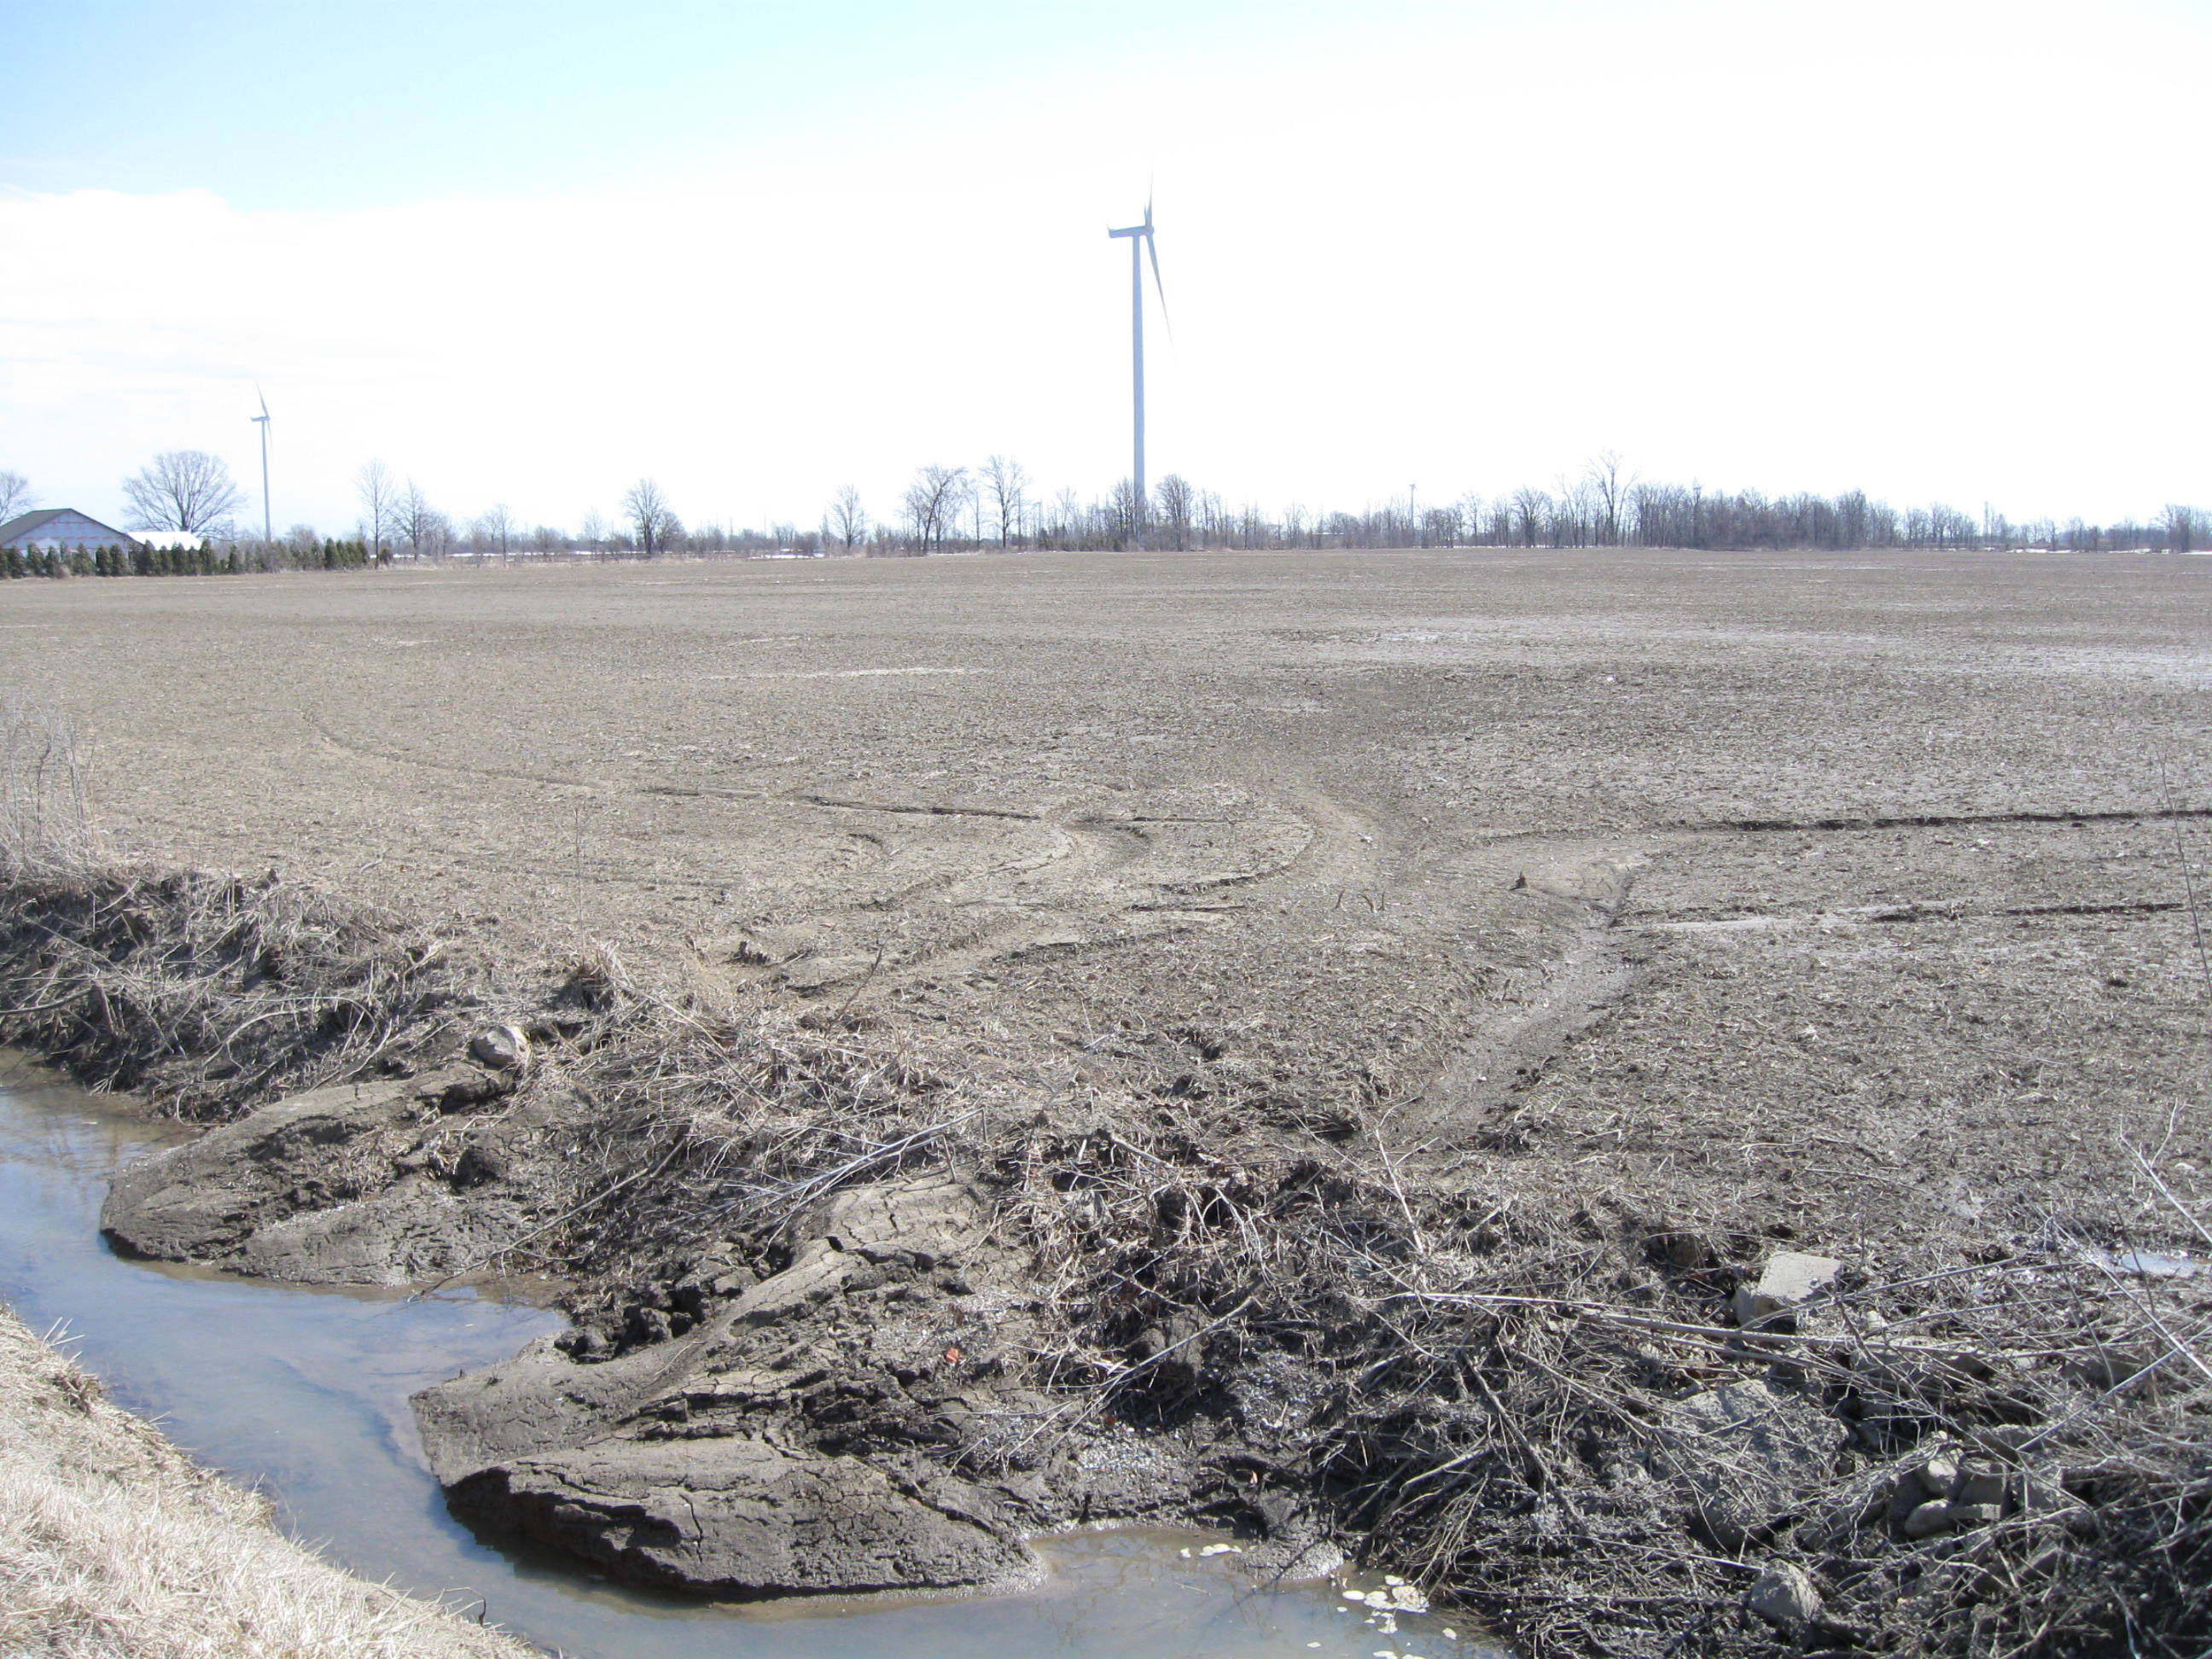 Sheet and rill erosion present on a tilled field with sediment deposition evident in the associated drainage ditch